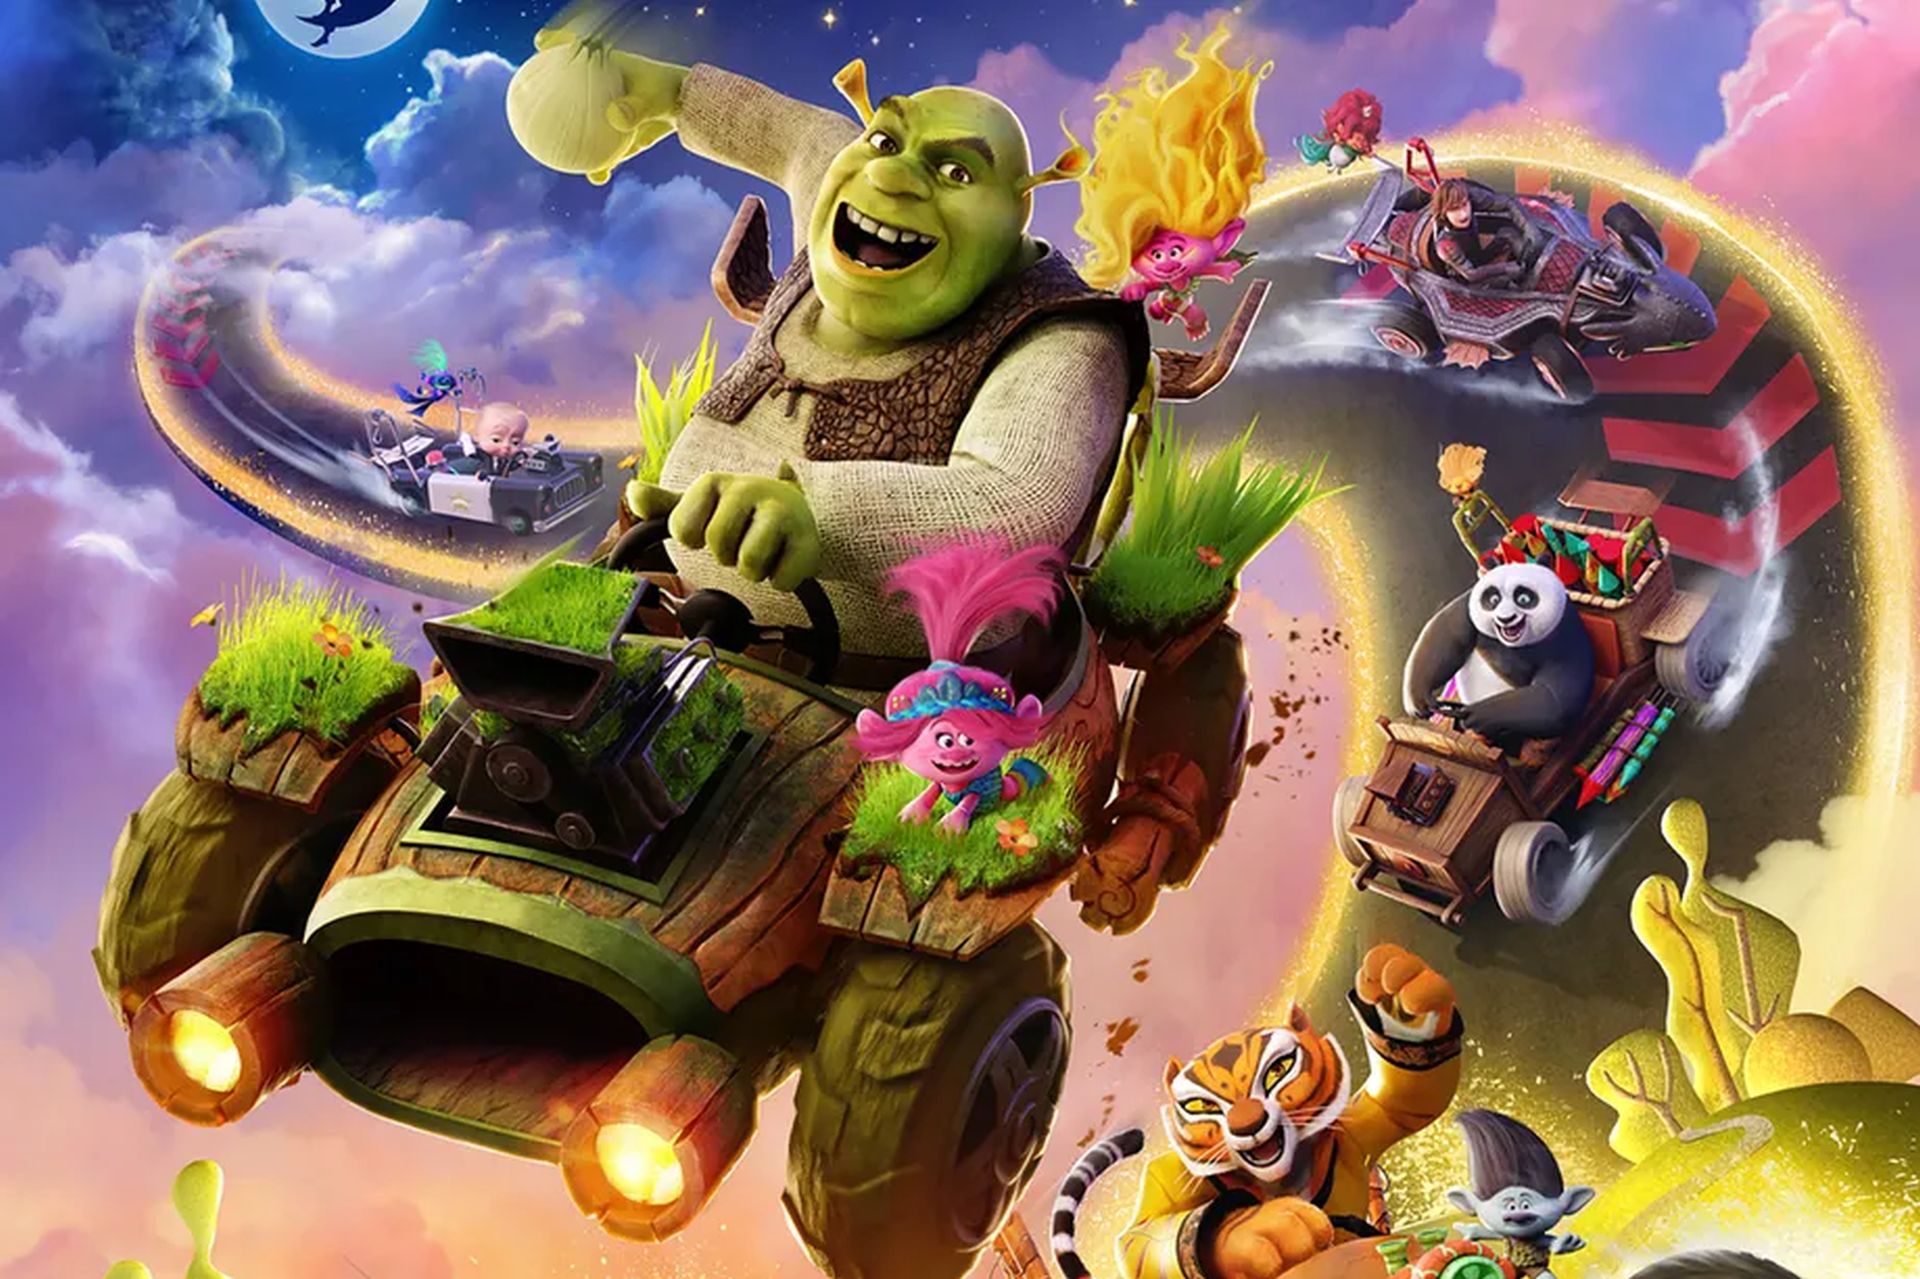 DreamWorks All-Star Kart Racing is a New Kart Racer Starring Shrek, Puss in Boots and Toothless